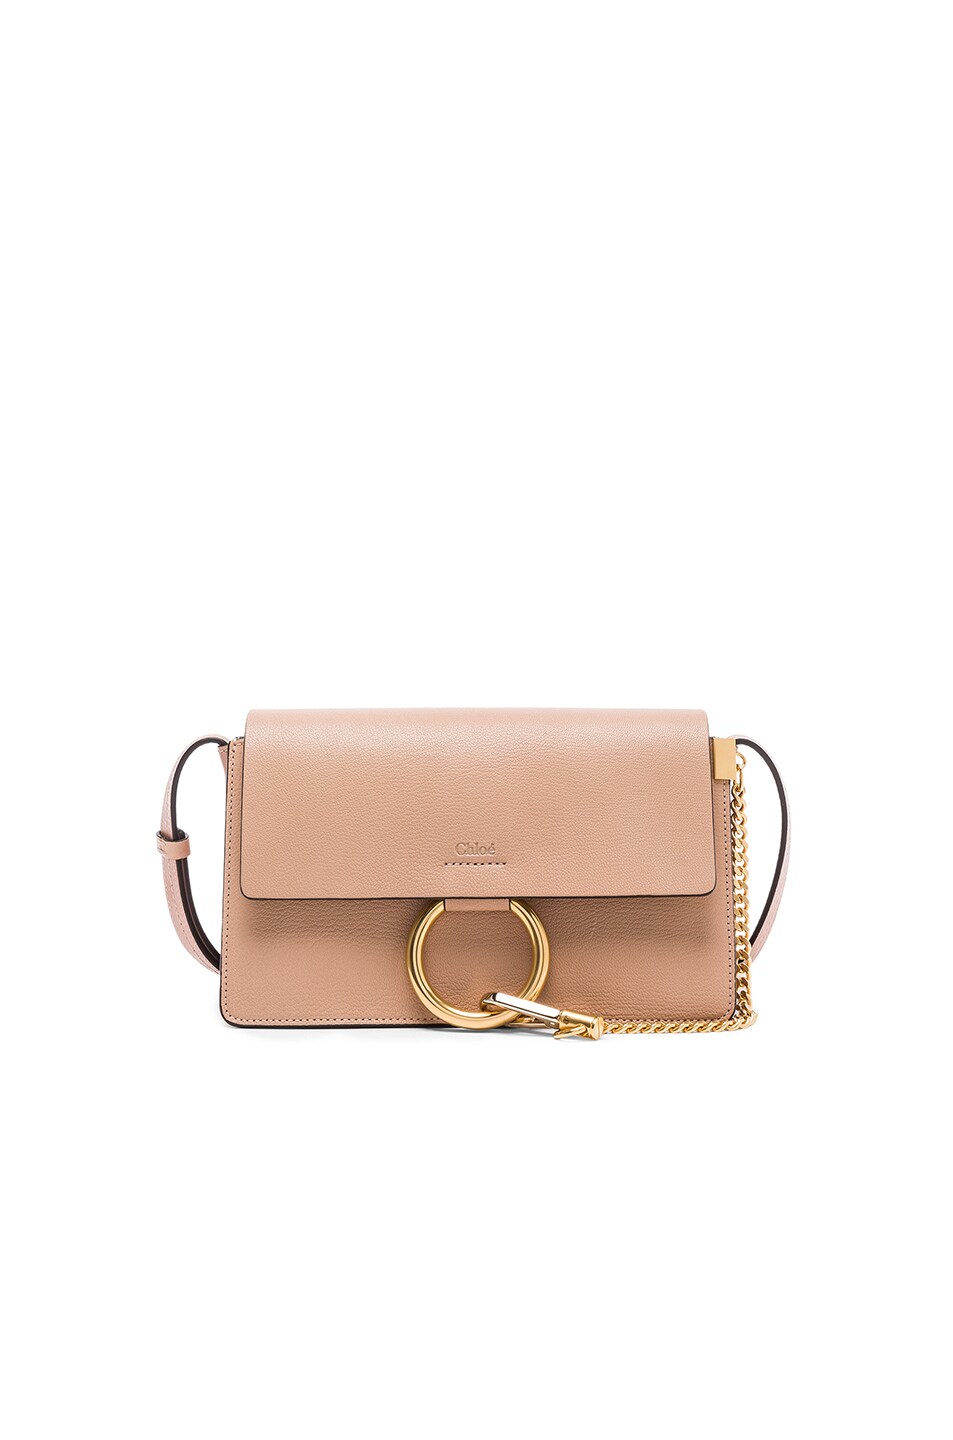 Image 1 of Chloe Small Leather Faye Bag in Biscotti Beige